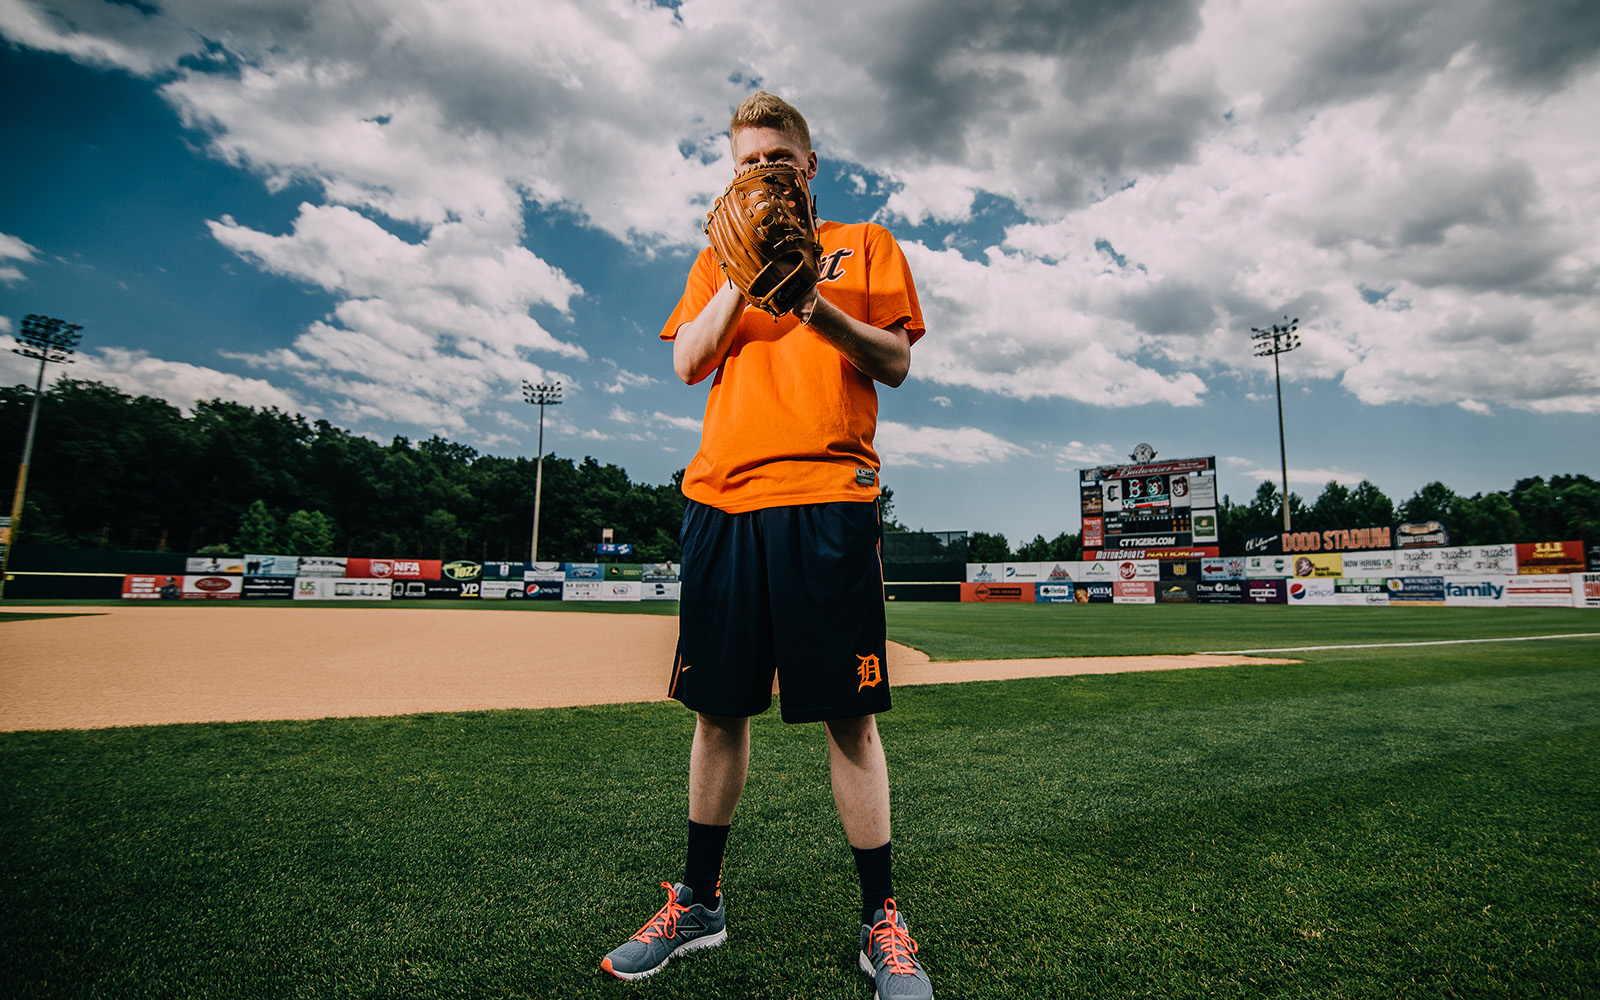 Logan Bement is  currently assigned to the Detroit Tigers' farm team, the Connecticut Tigers in Norwich, Conn. (Nathan Oldham/UConn School of Business)